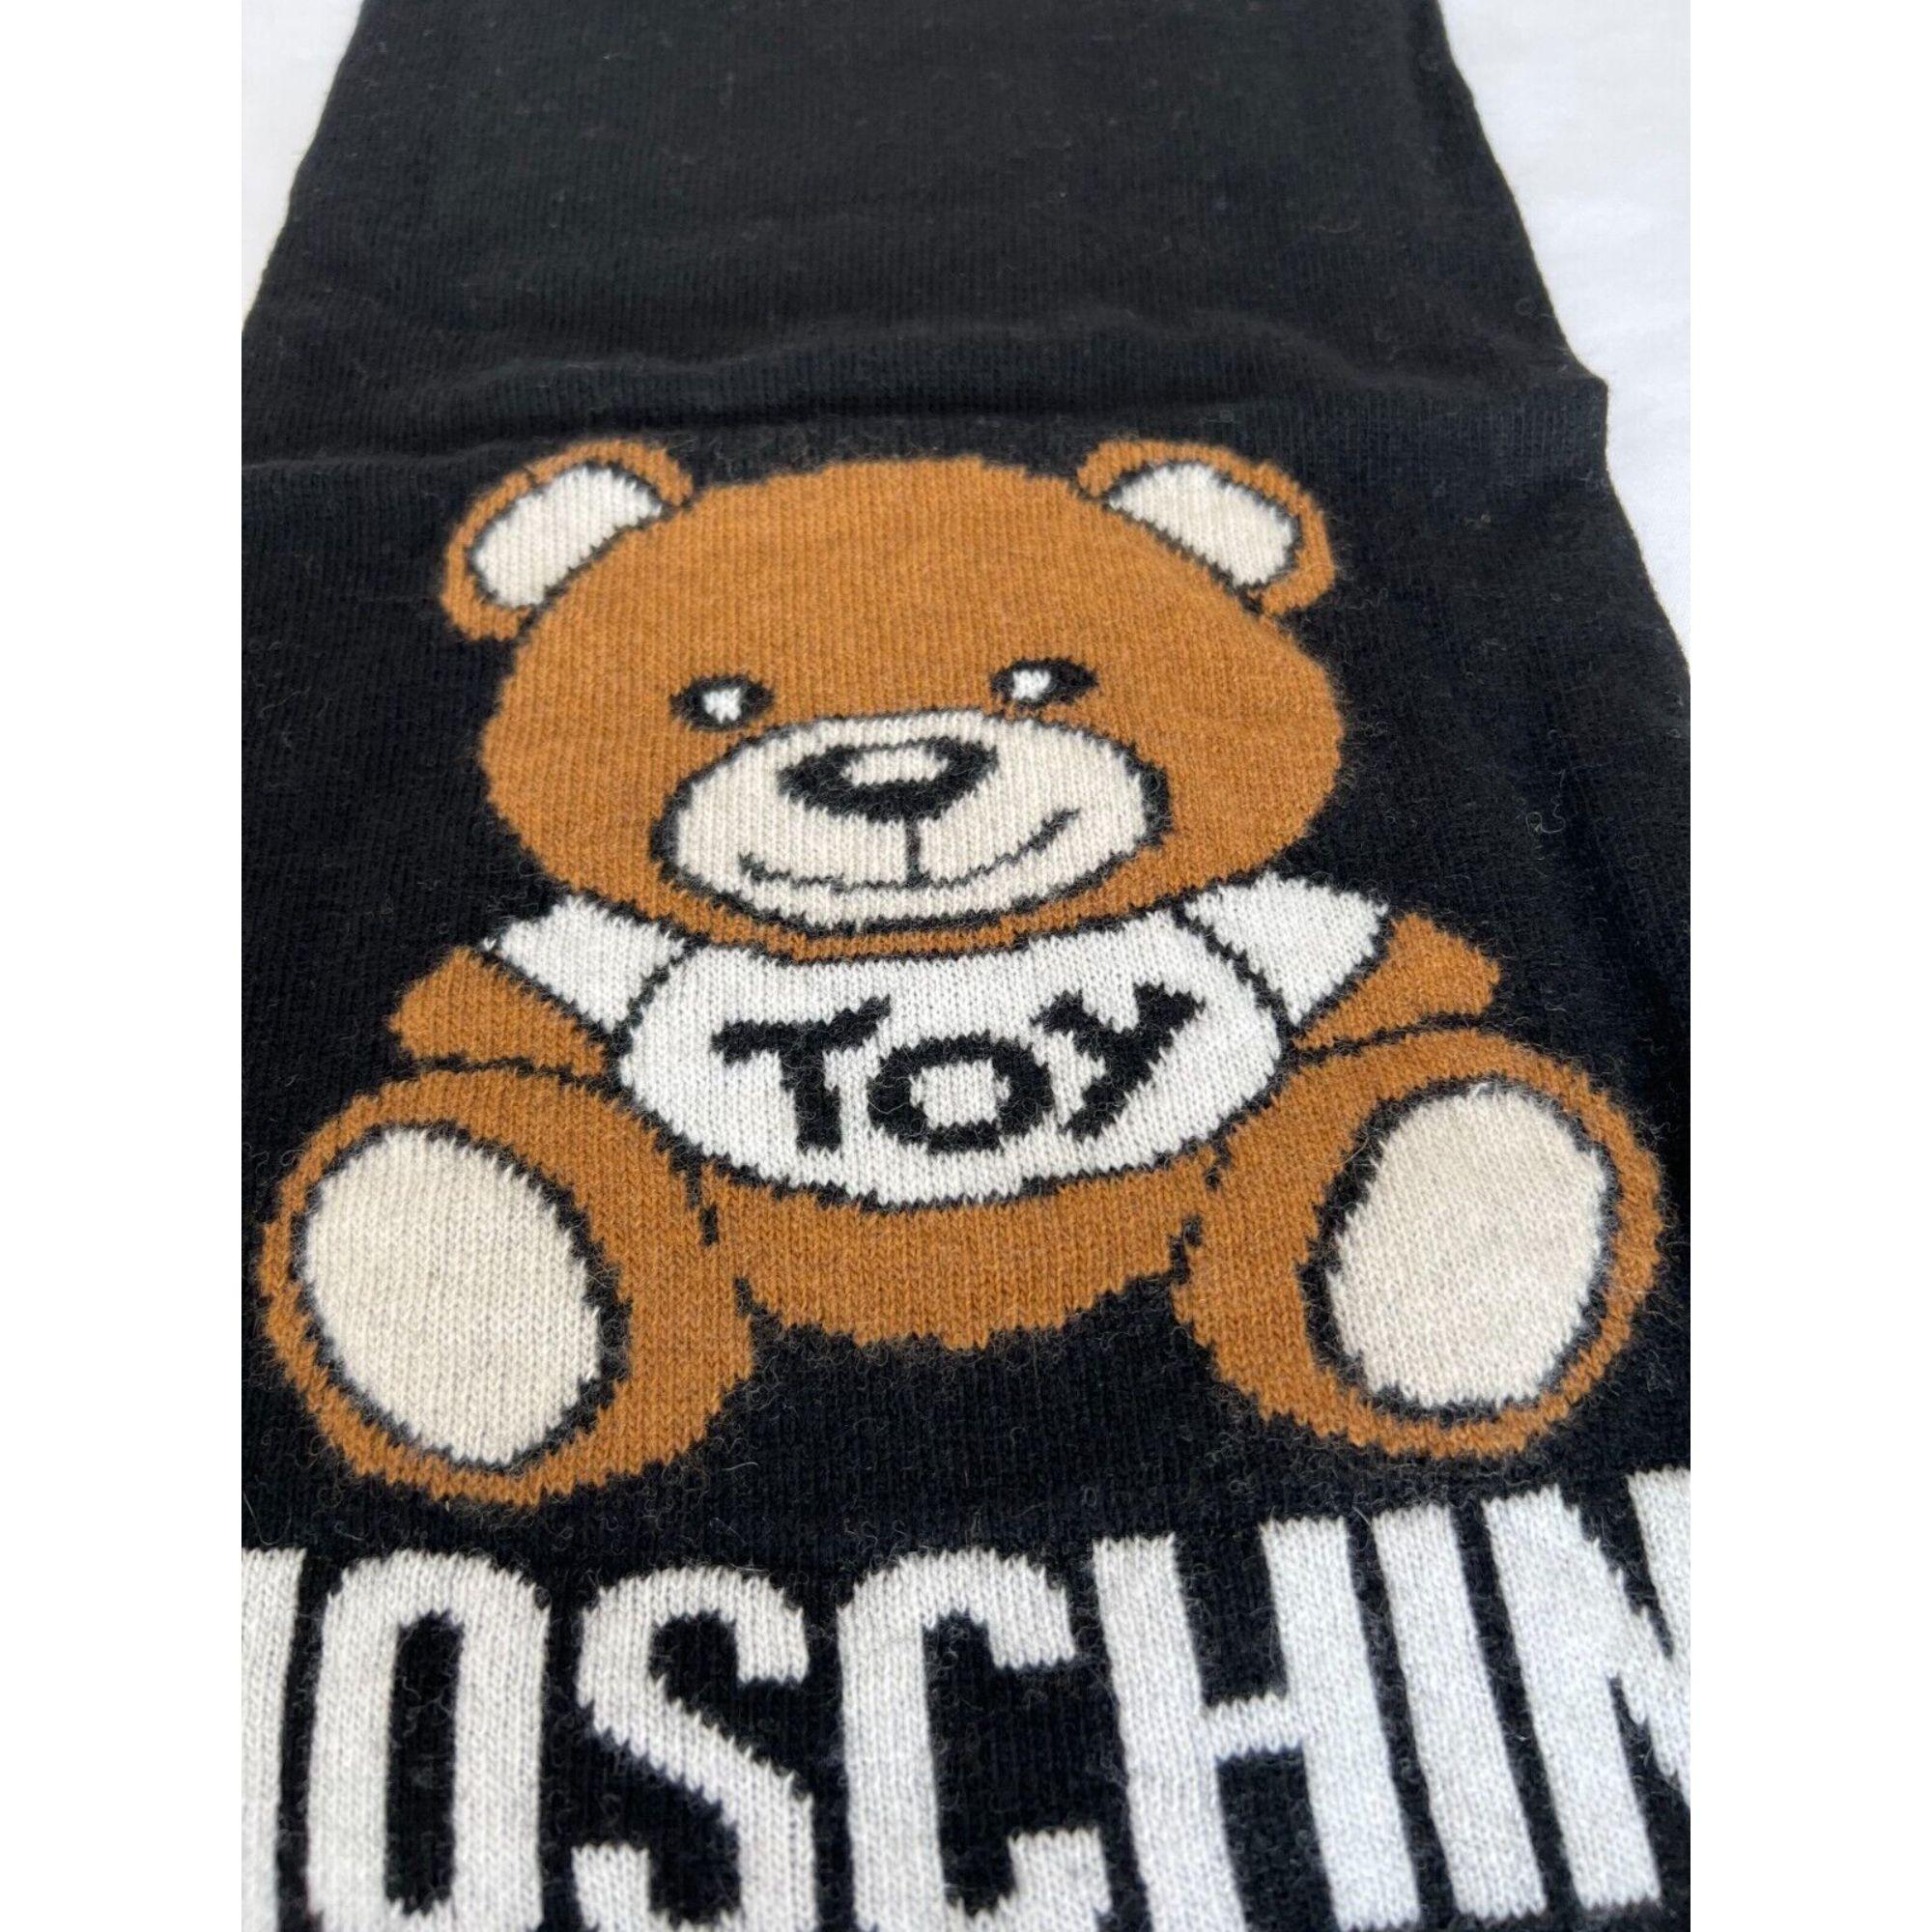 Moschino Couture Teddy Bear Black Scarf Tie Shaped by Jeremy Scott For Sale 5